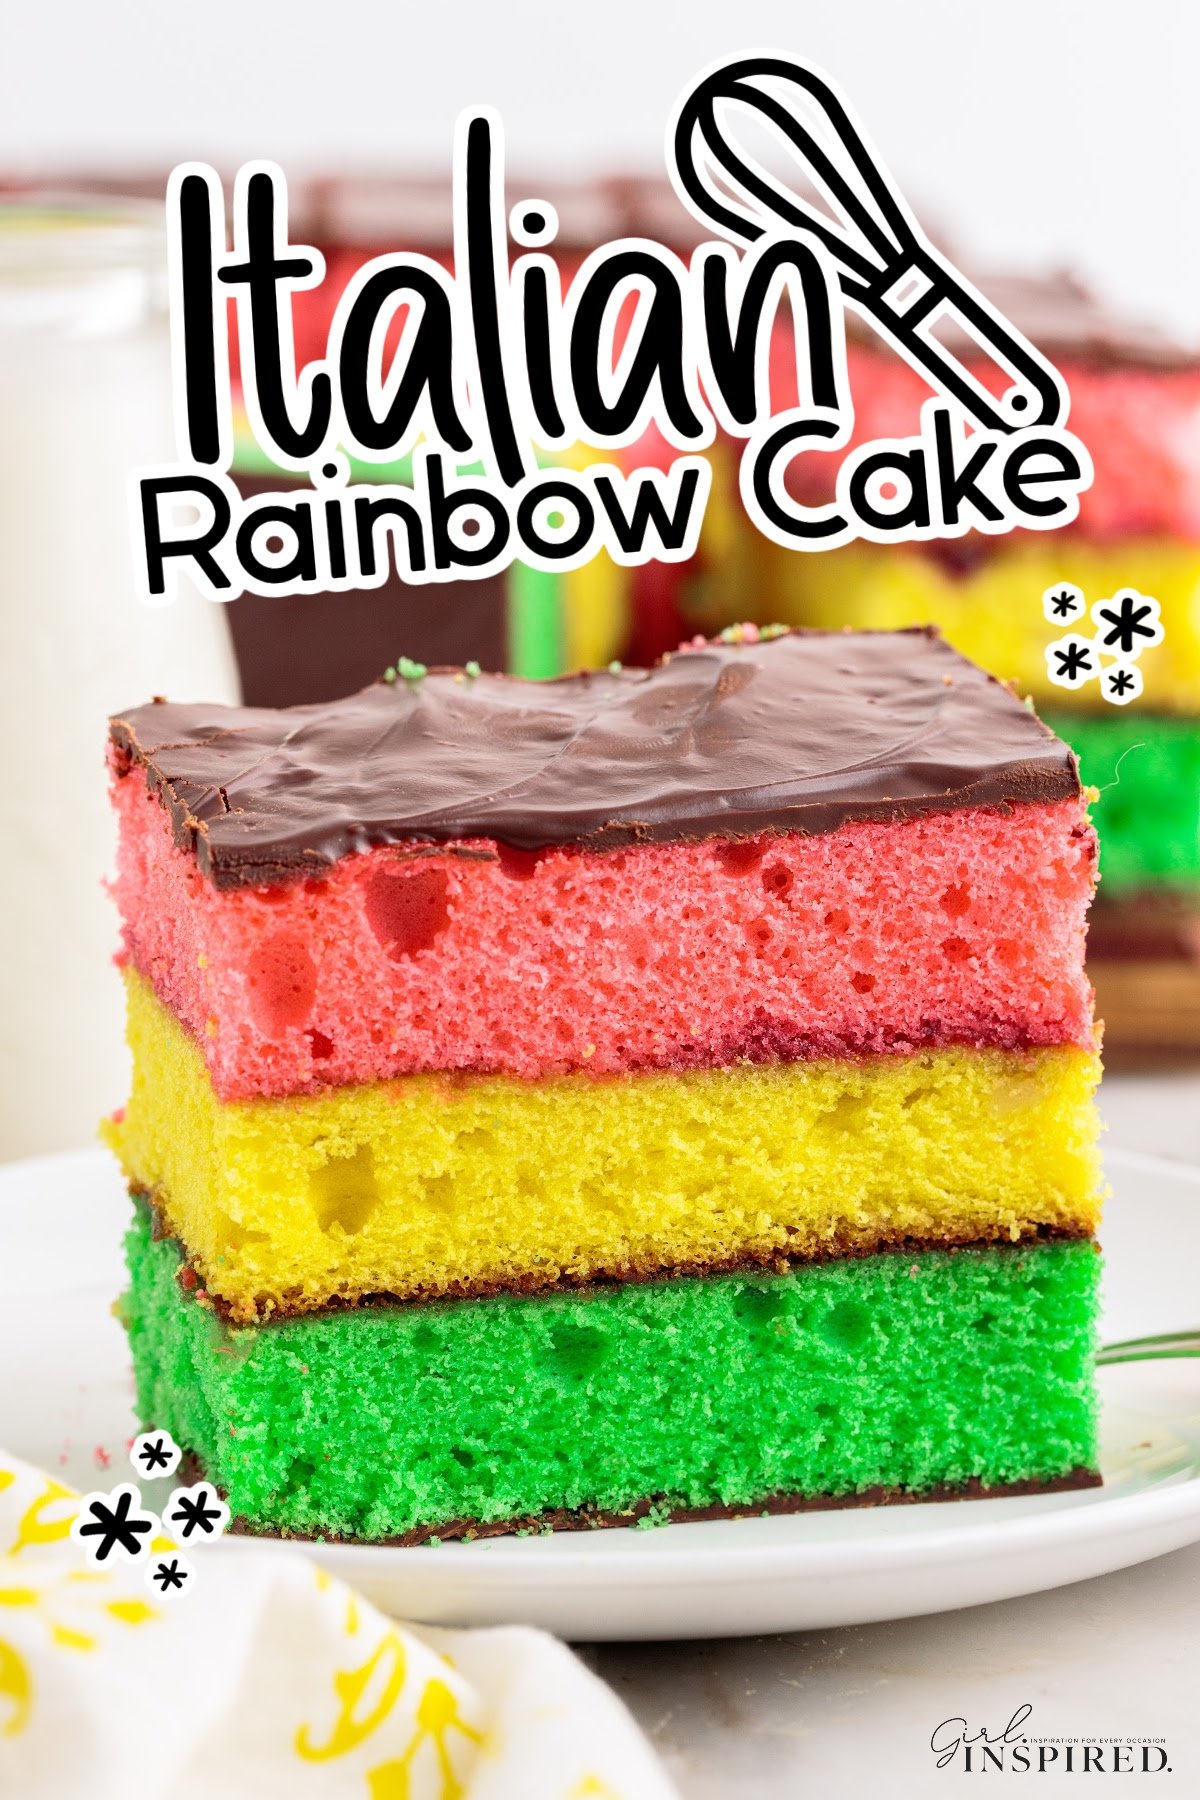 Front close up of a slice of Italian Rainbow Cake with text overlay.